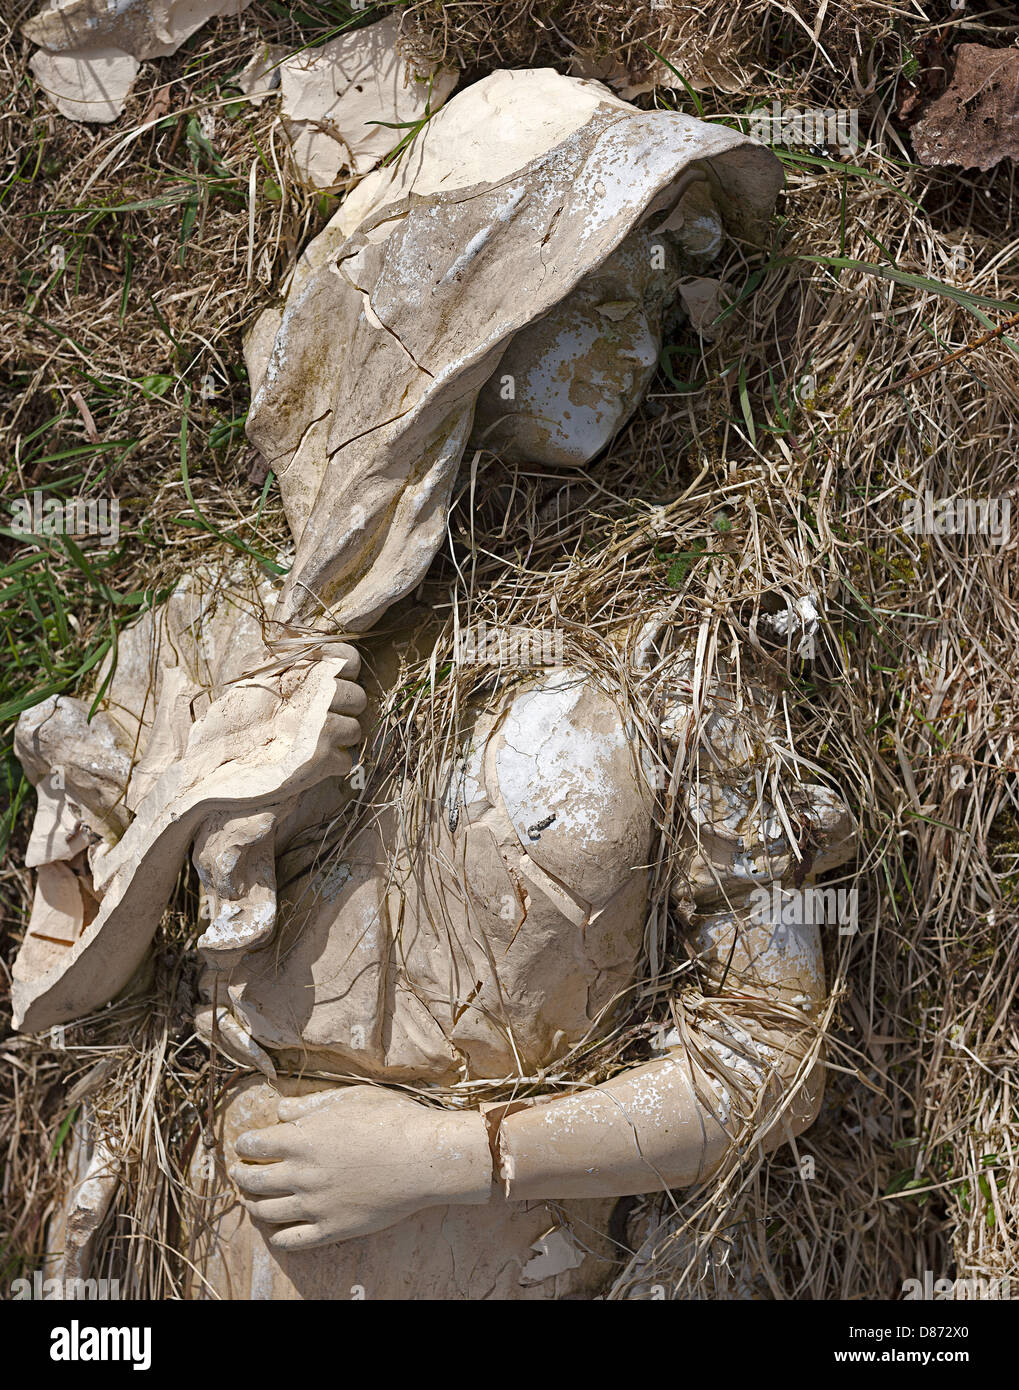 Statue of young lady broken through high winds. Statue laying in grass. Stock Photo